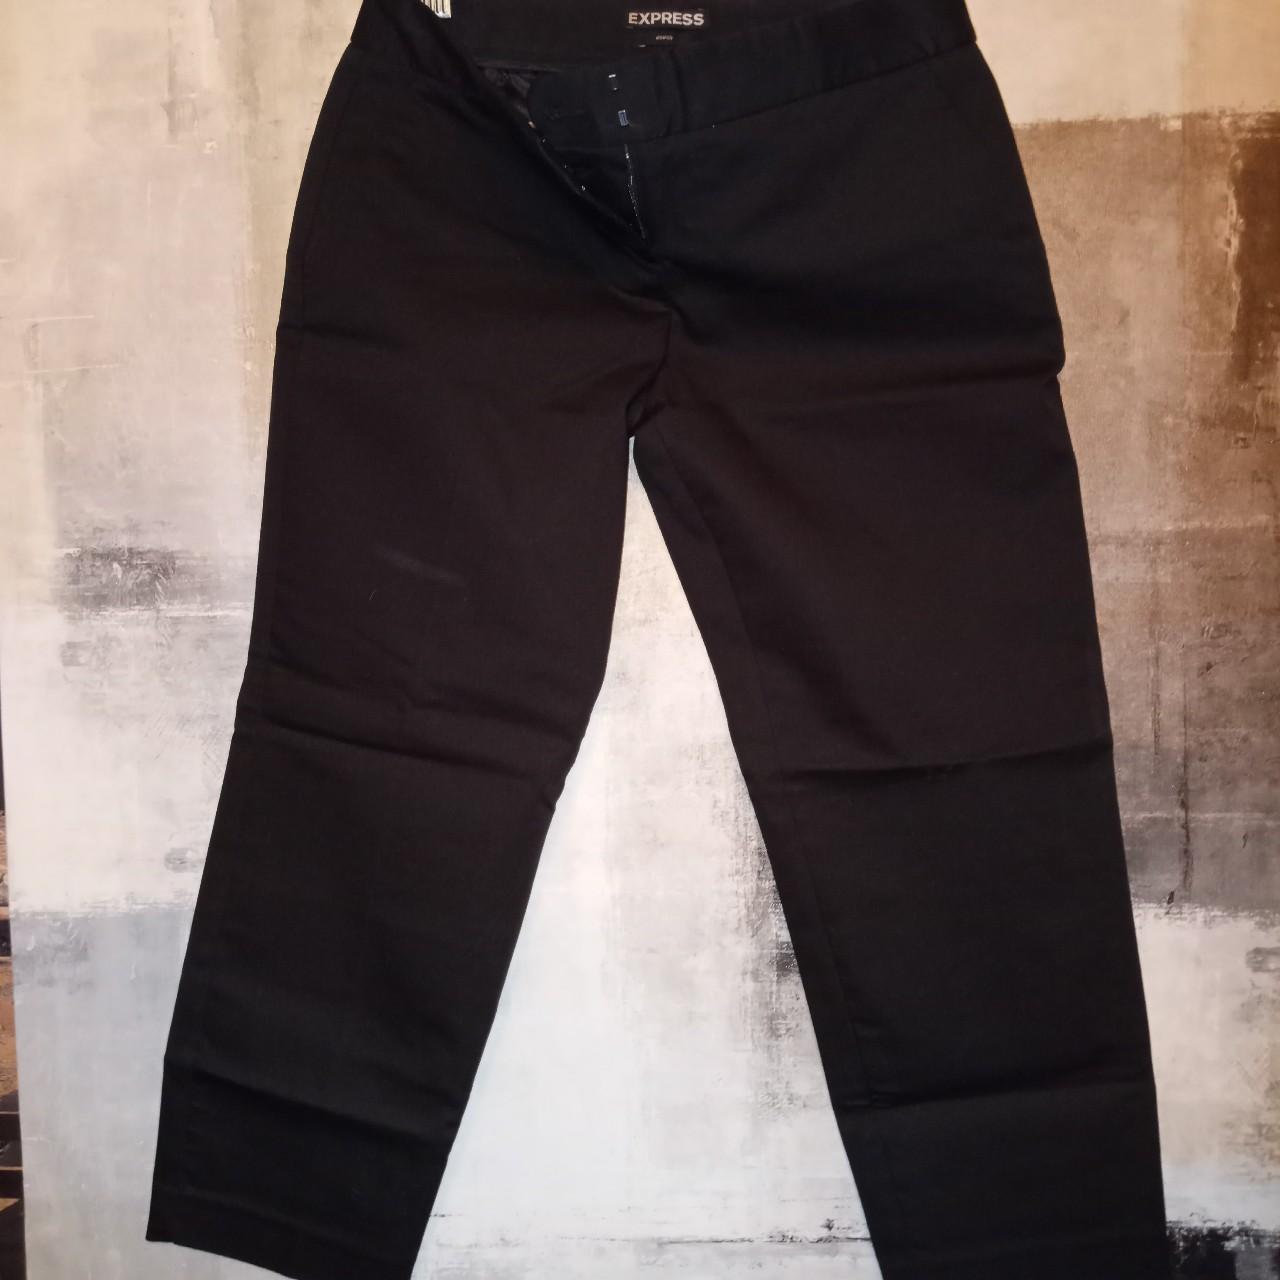 Women's #Express editor pants 👖. Black and in... - Depop